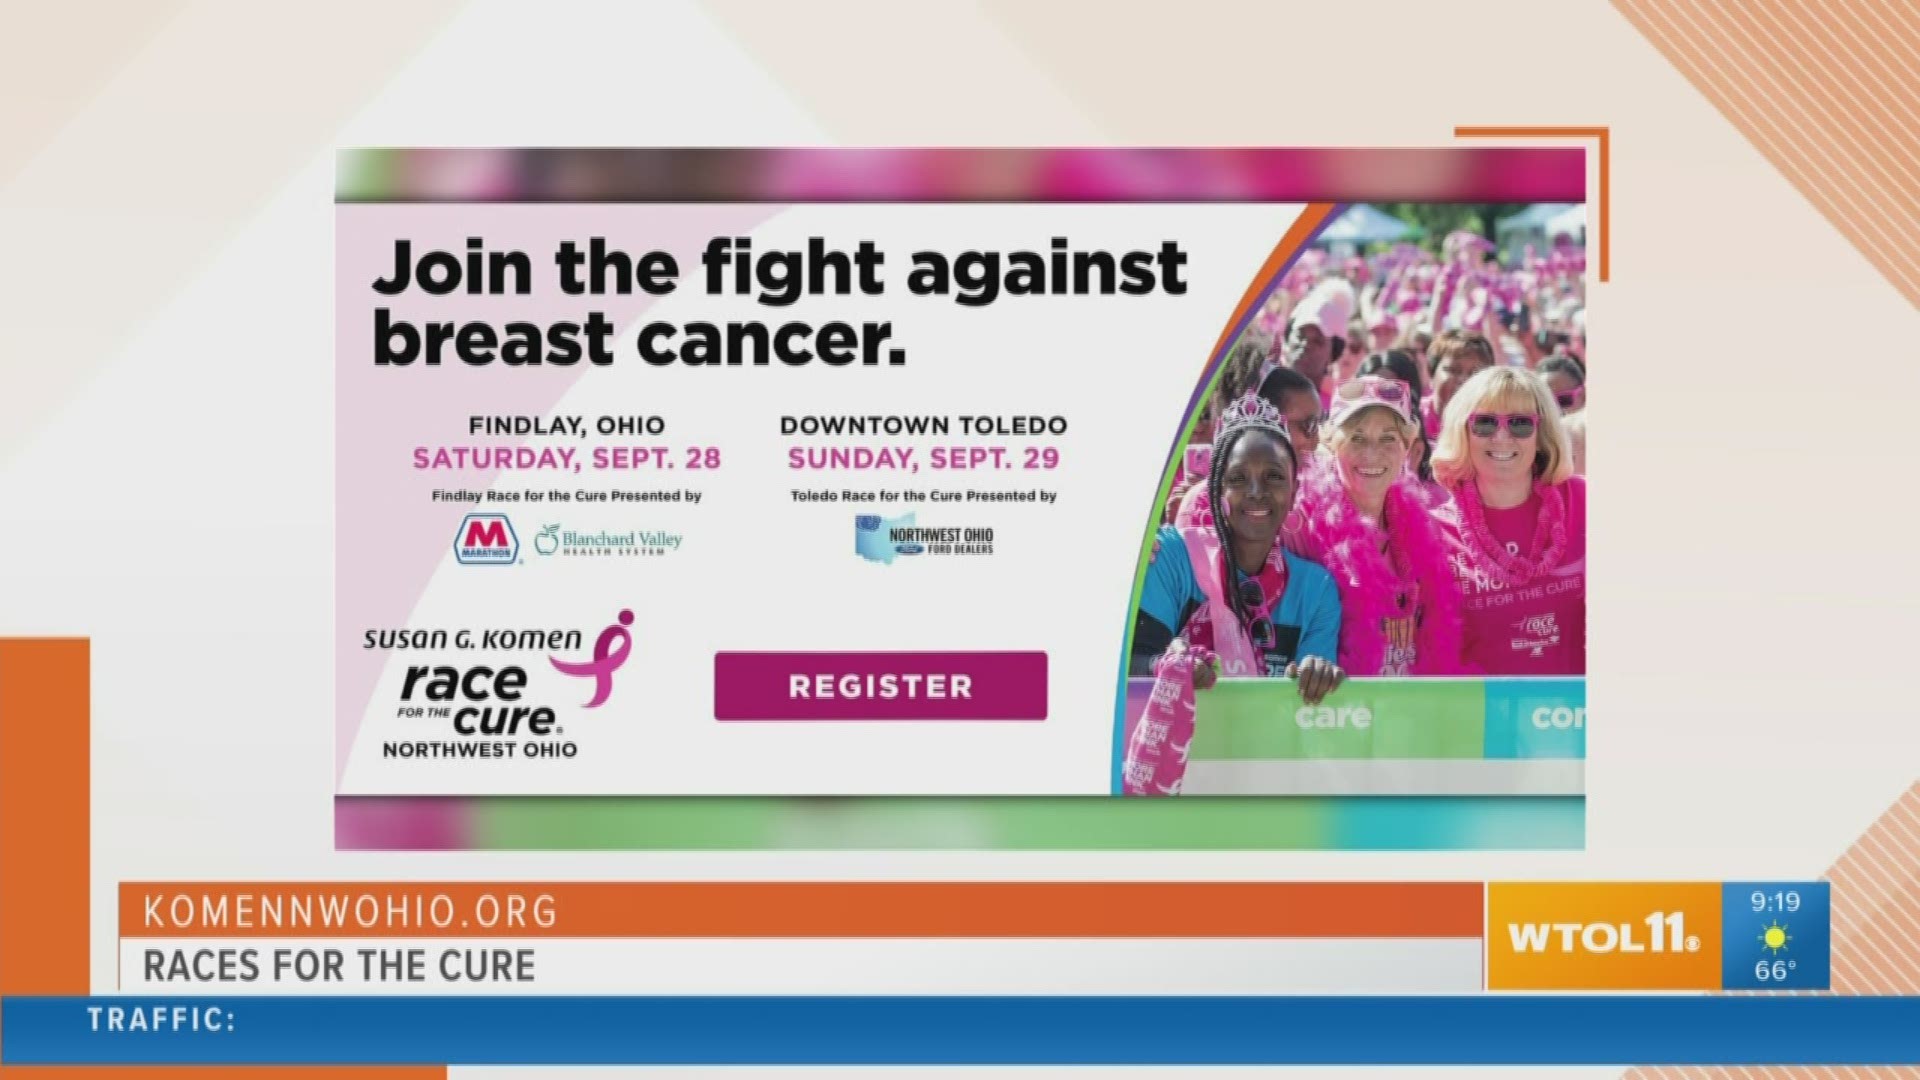 It's not too late to get involved! Findlay's race is this Saturday. Desmond Strooh from the Komen Foundation explains how you can get on board and Toledo In Celebration Of Honoree Artina McCabe describes her experience as a cancer survivor.